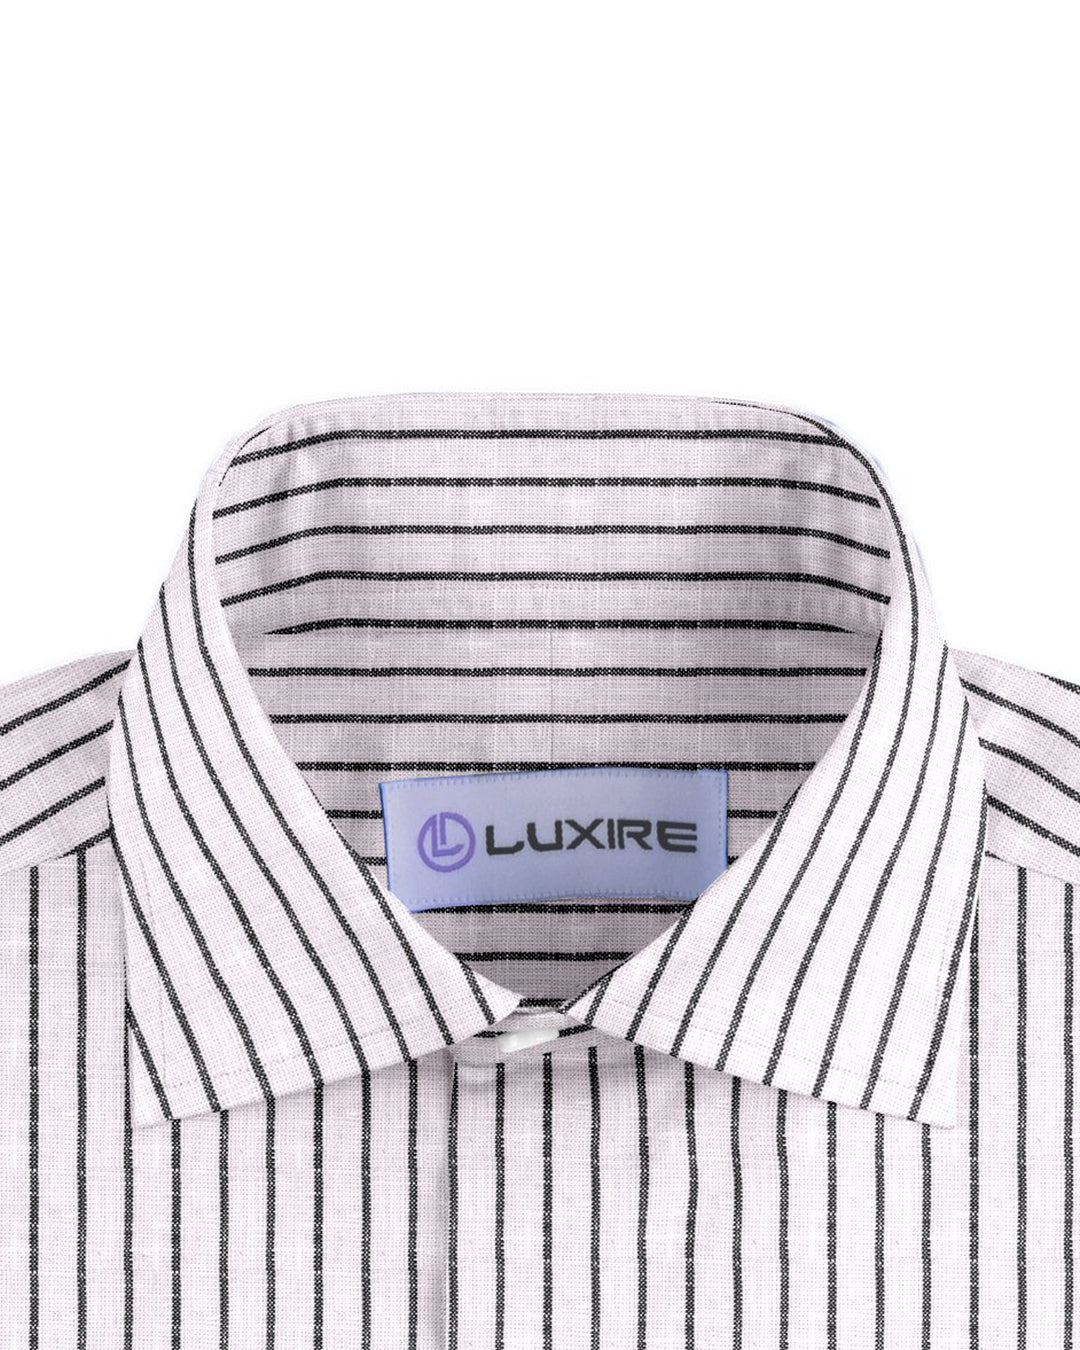 Collar of the custom linen shirt for men in white and black pinstripes by Luxire Clothing